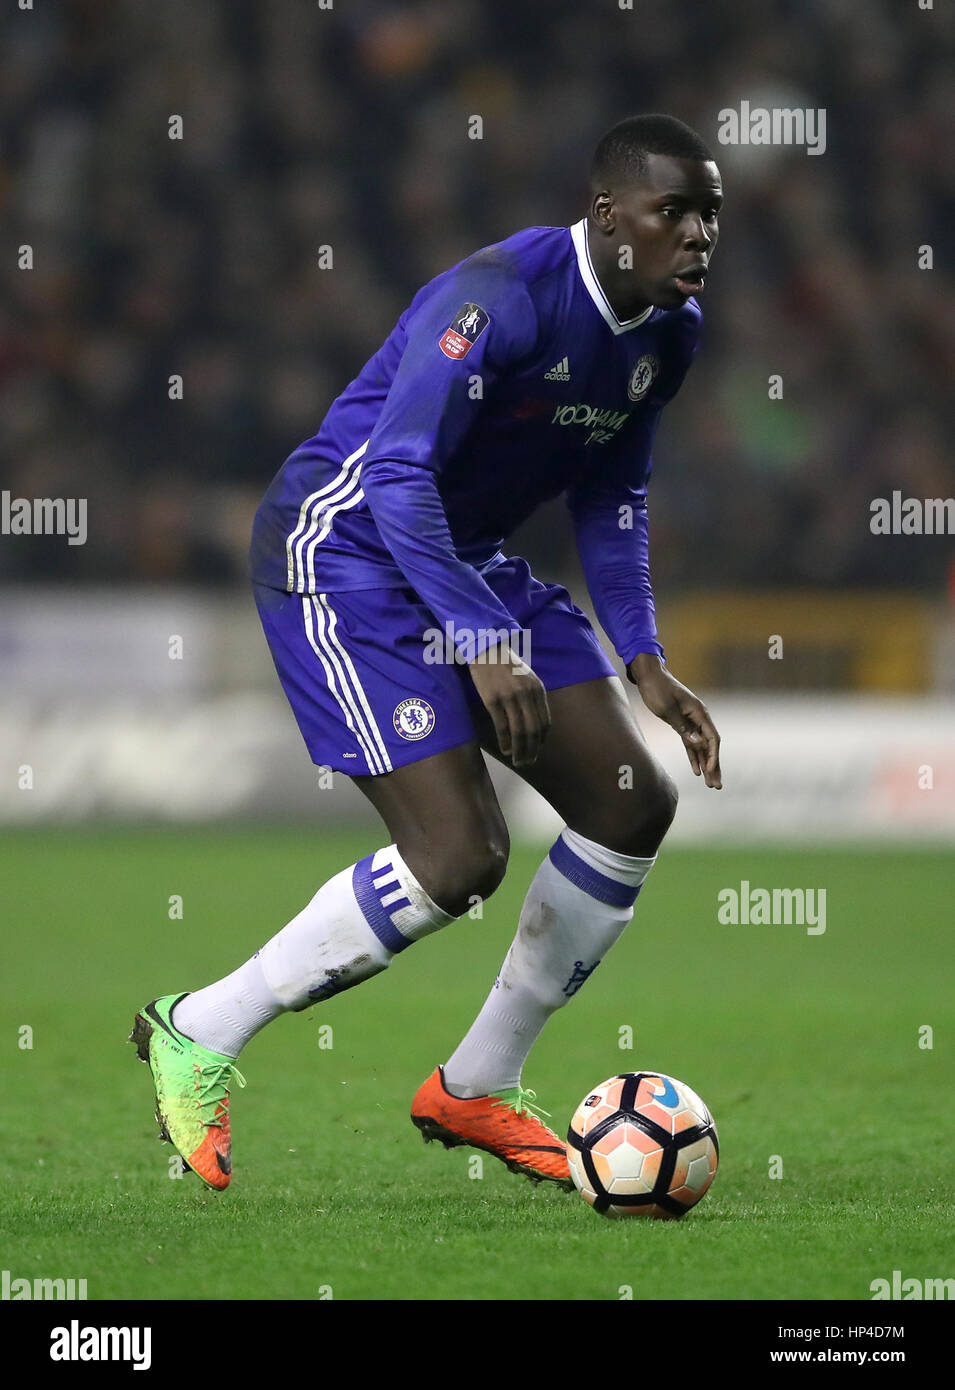 Chelsea's Kurt Zouma during the Emirates FA Cup, Fifth Round match at Molineux, Wolverhampton. PRESS ASSOCIATION Photo. Picture date: Saturday February 18, 2017. See PA story SOCCER Wolves. Photo credit should read: Nick Potts/PA Wire. RESTRICTIONS: No use with unauthorised audio, video, data, fixture lists, club/league logos or 'live' services. Online in-match use limited to 75 images, no video emulation. No use in betting, games or single club/league/player publications. Stock Photo